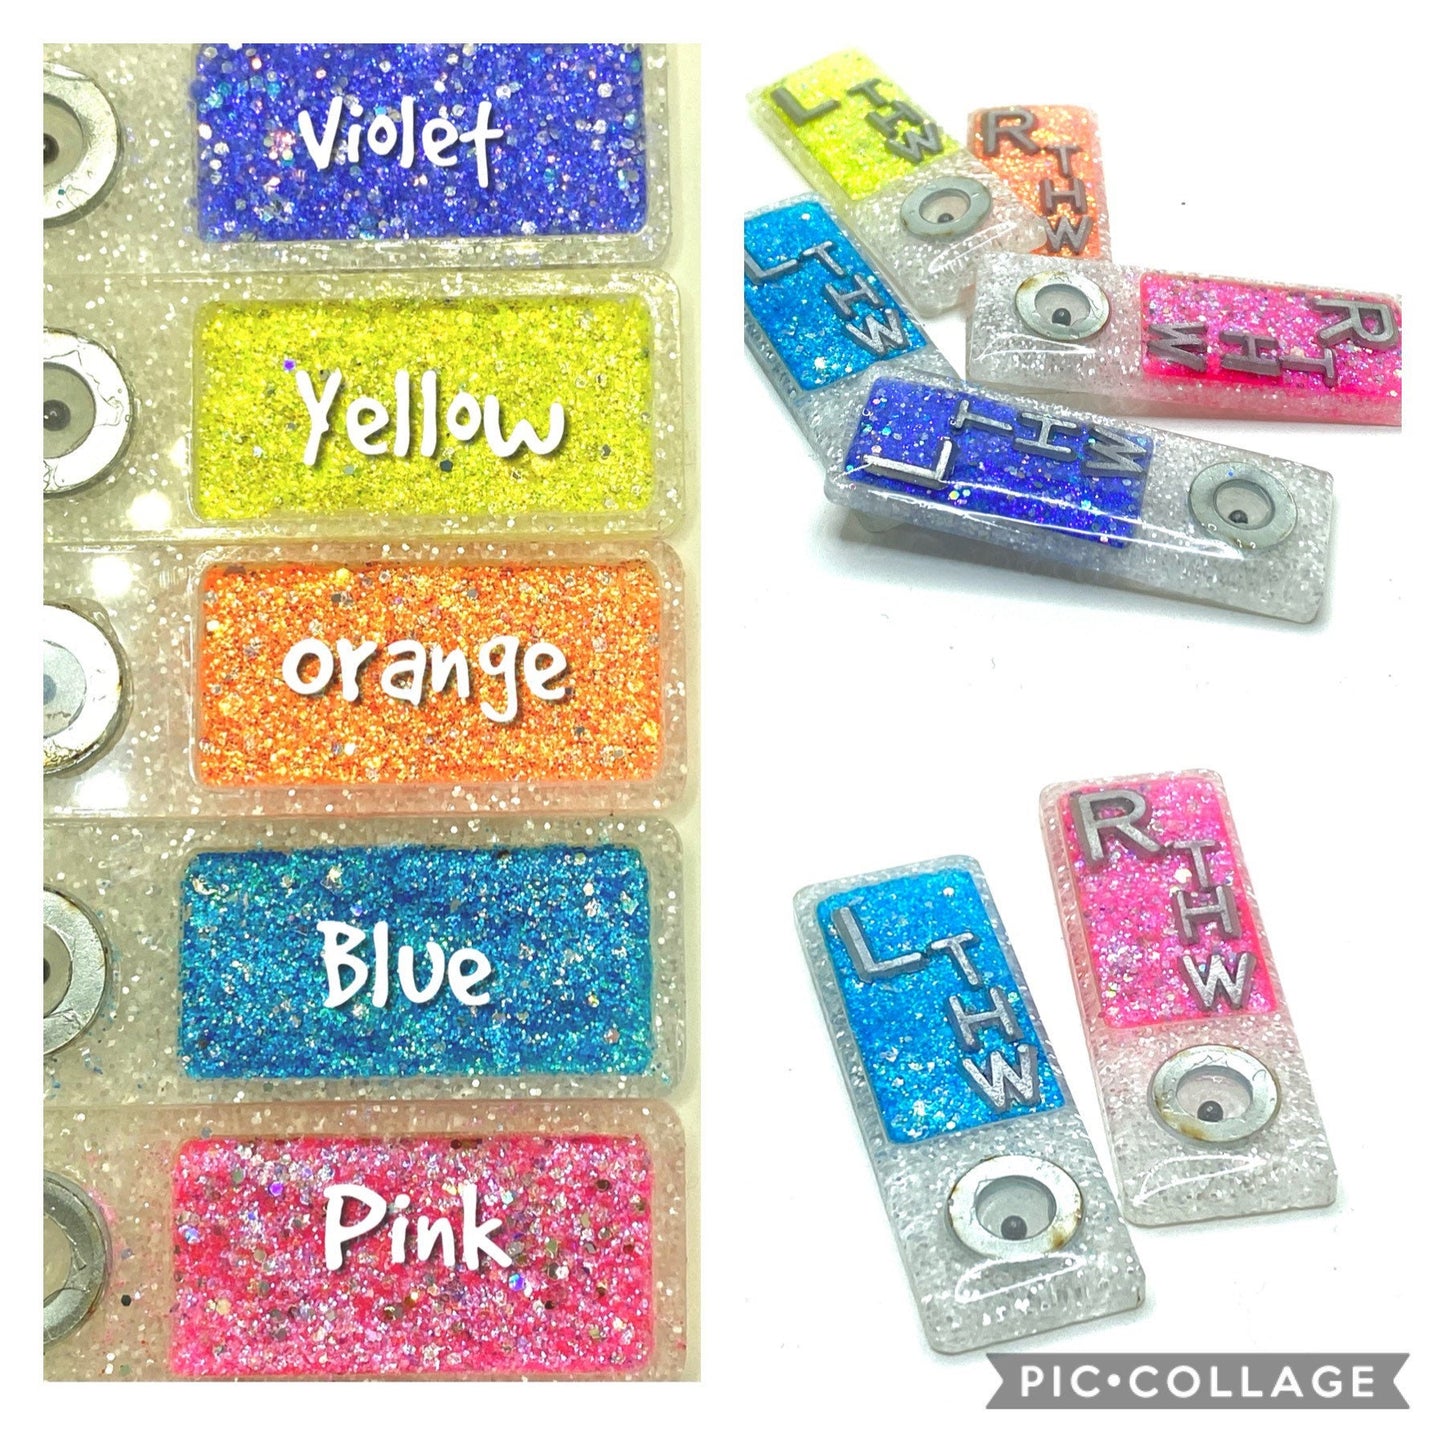 BB Position Bead White Glitter Base Neon Xray Markers Customized with 2-3 initials